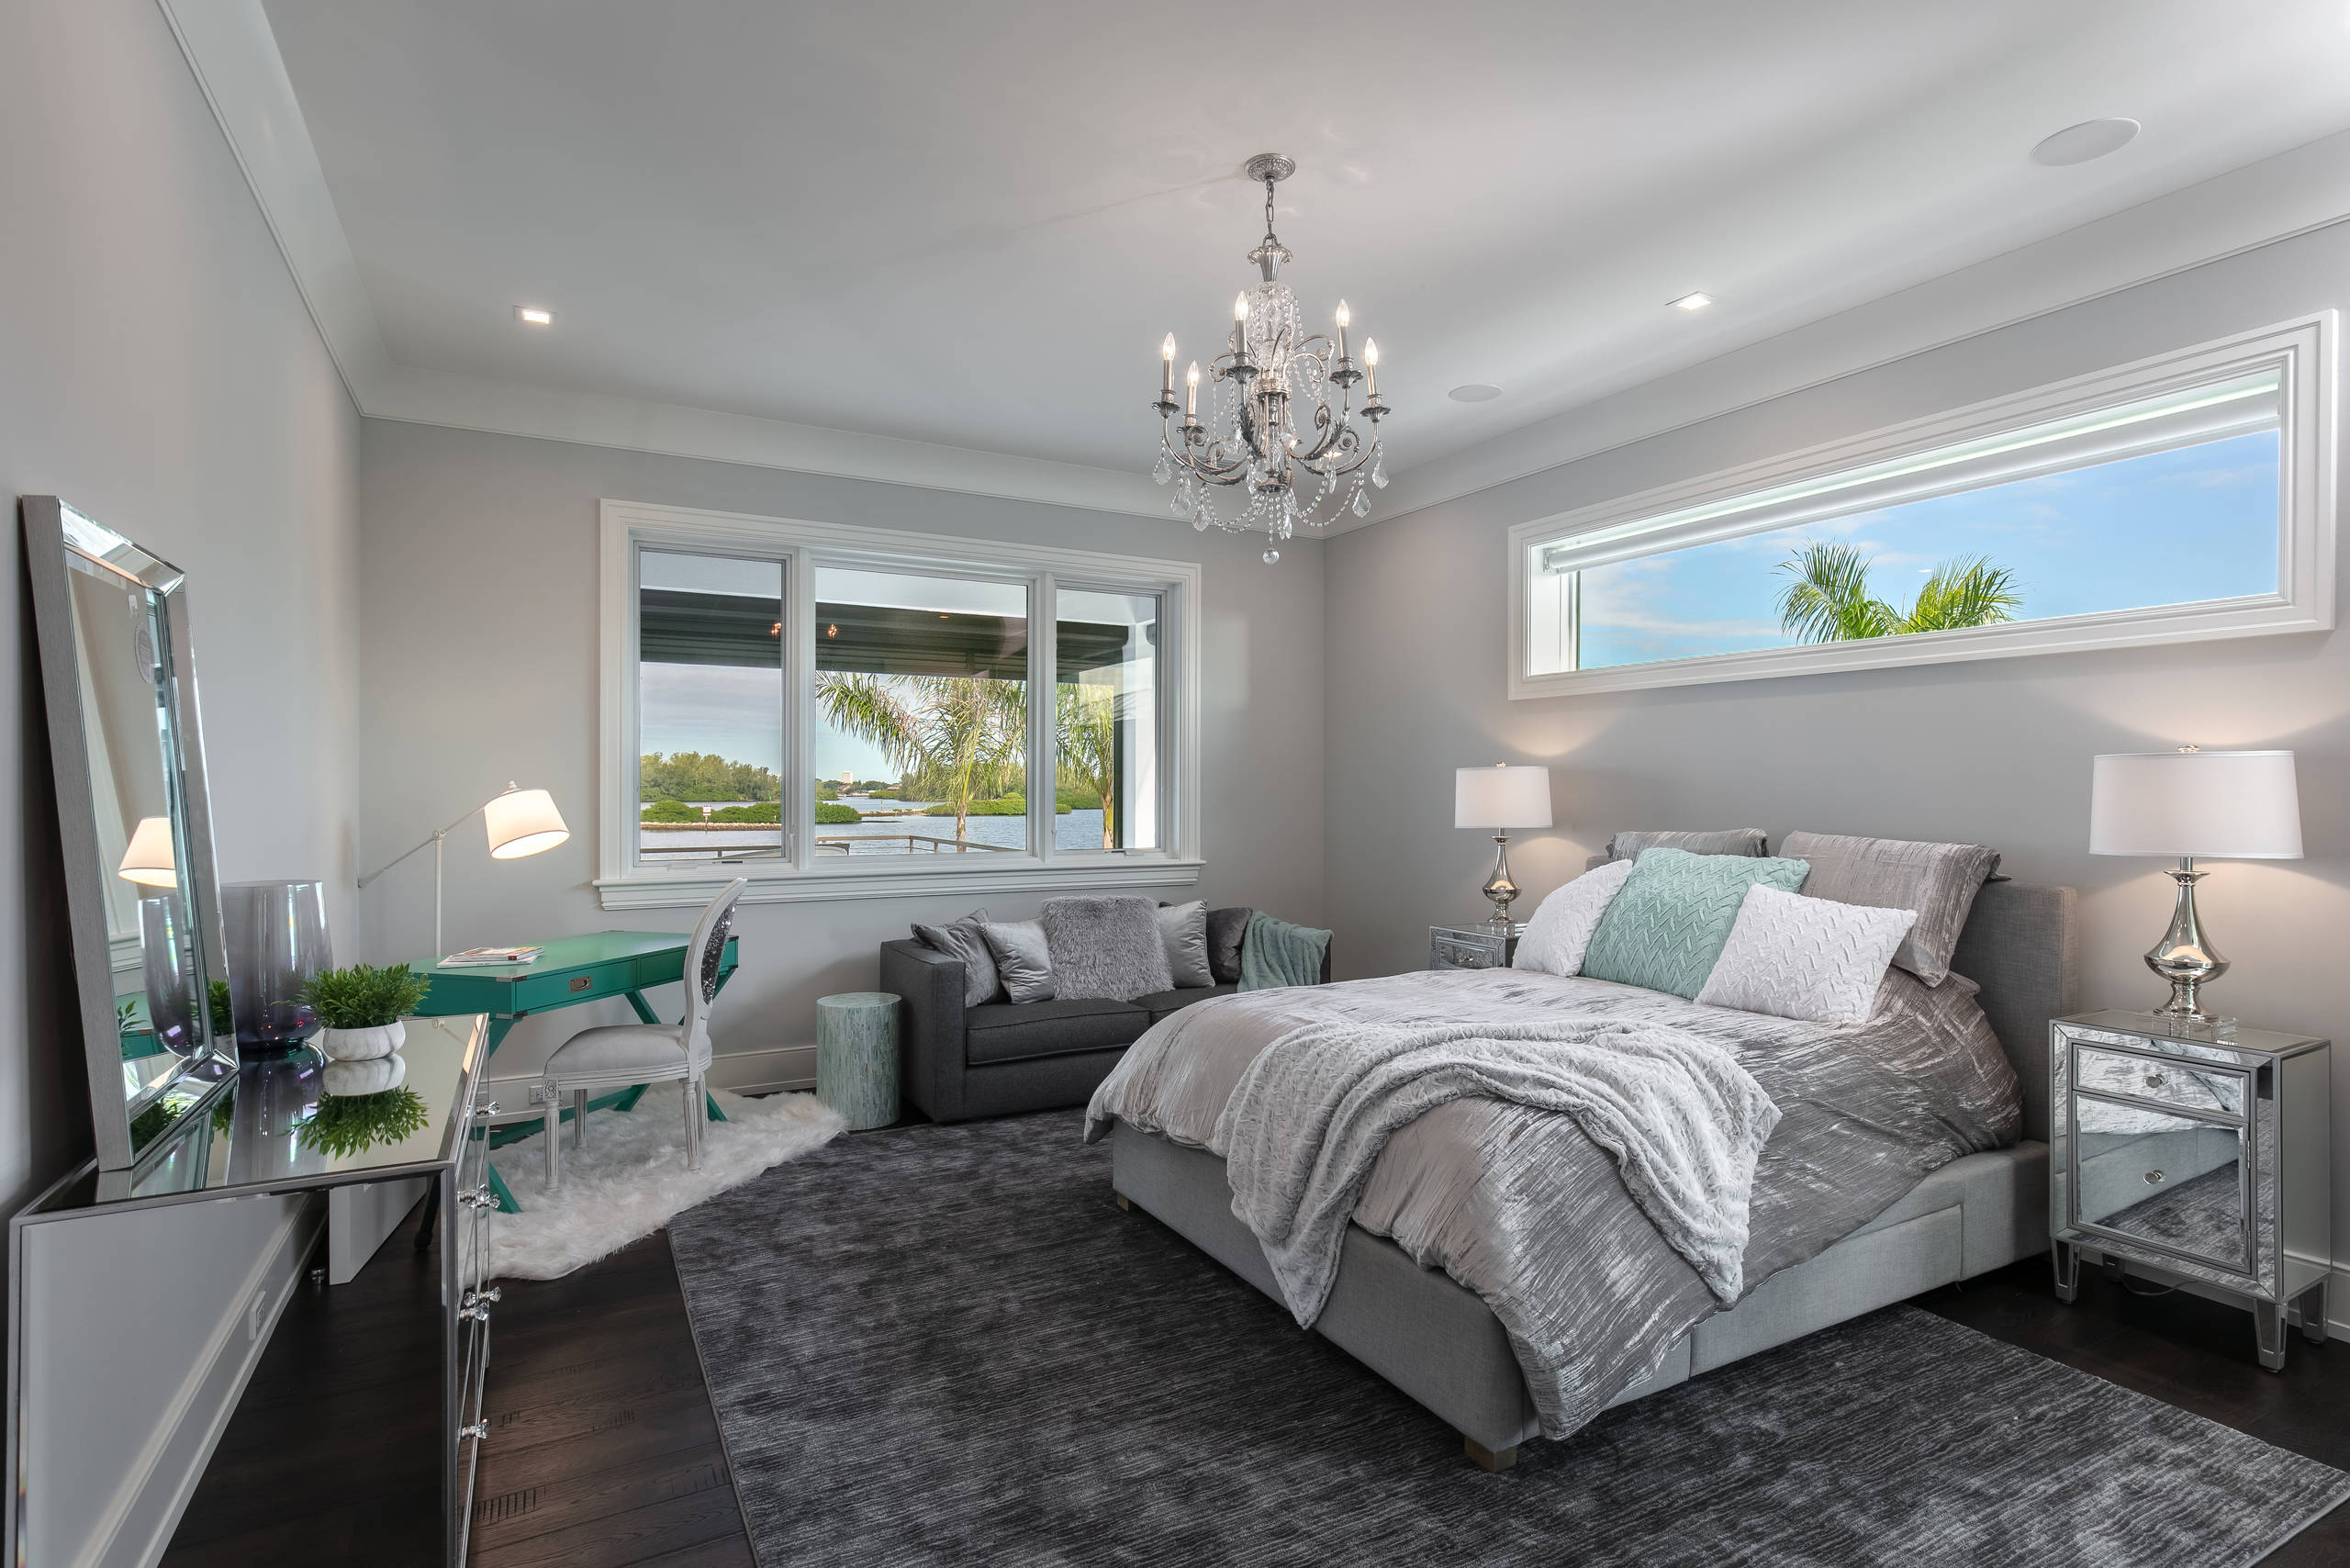 Awesome grey and teal bedroom Turquoise And Gray Bedroom Ideas Photos Houzz